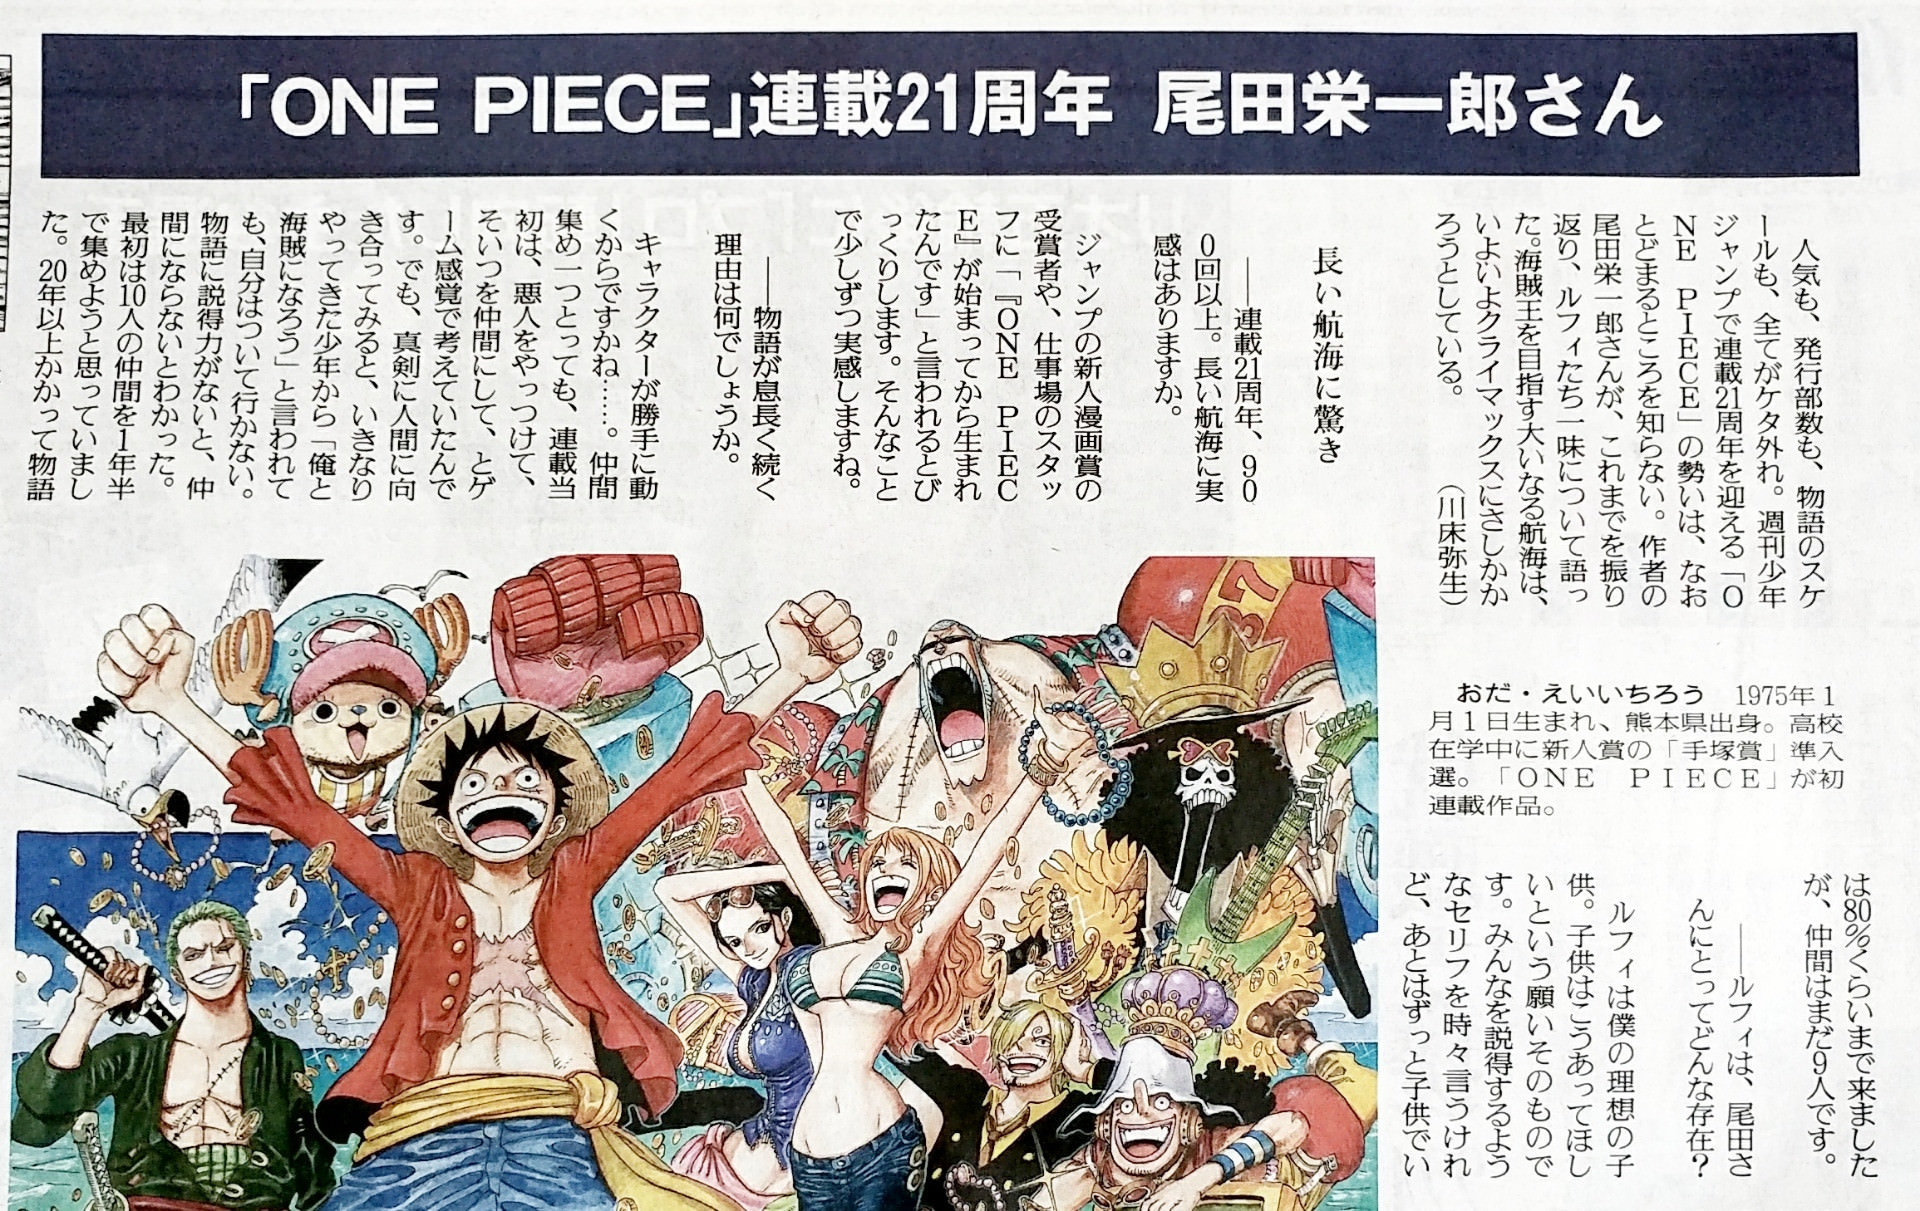 One piece completo